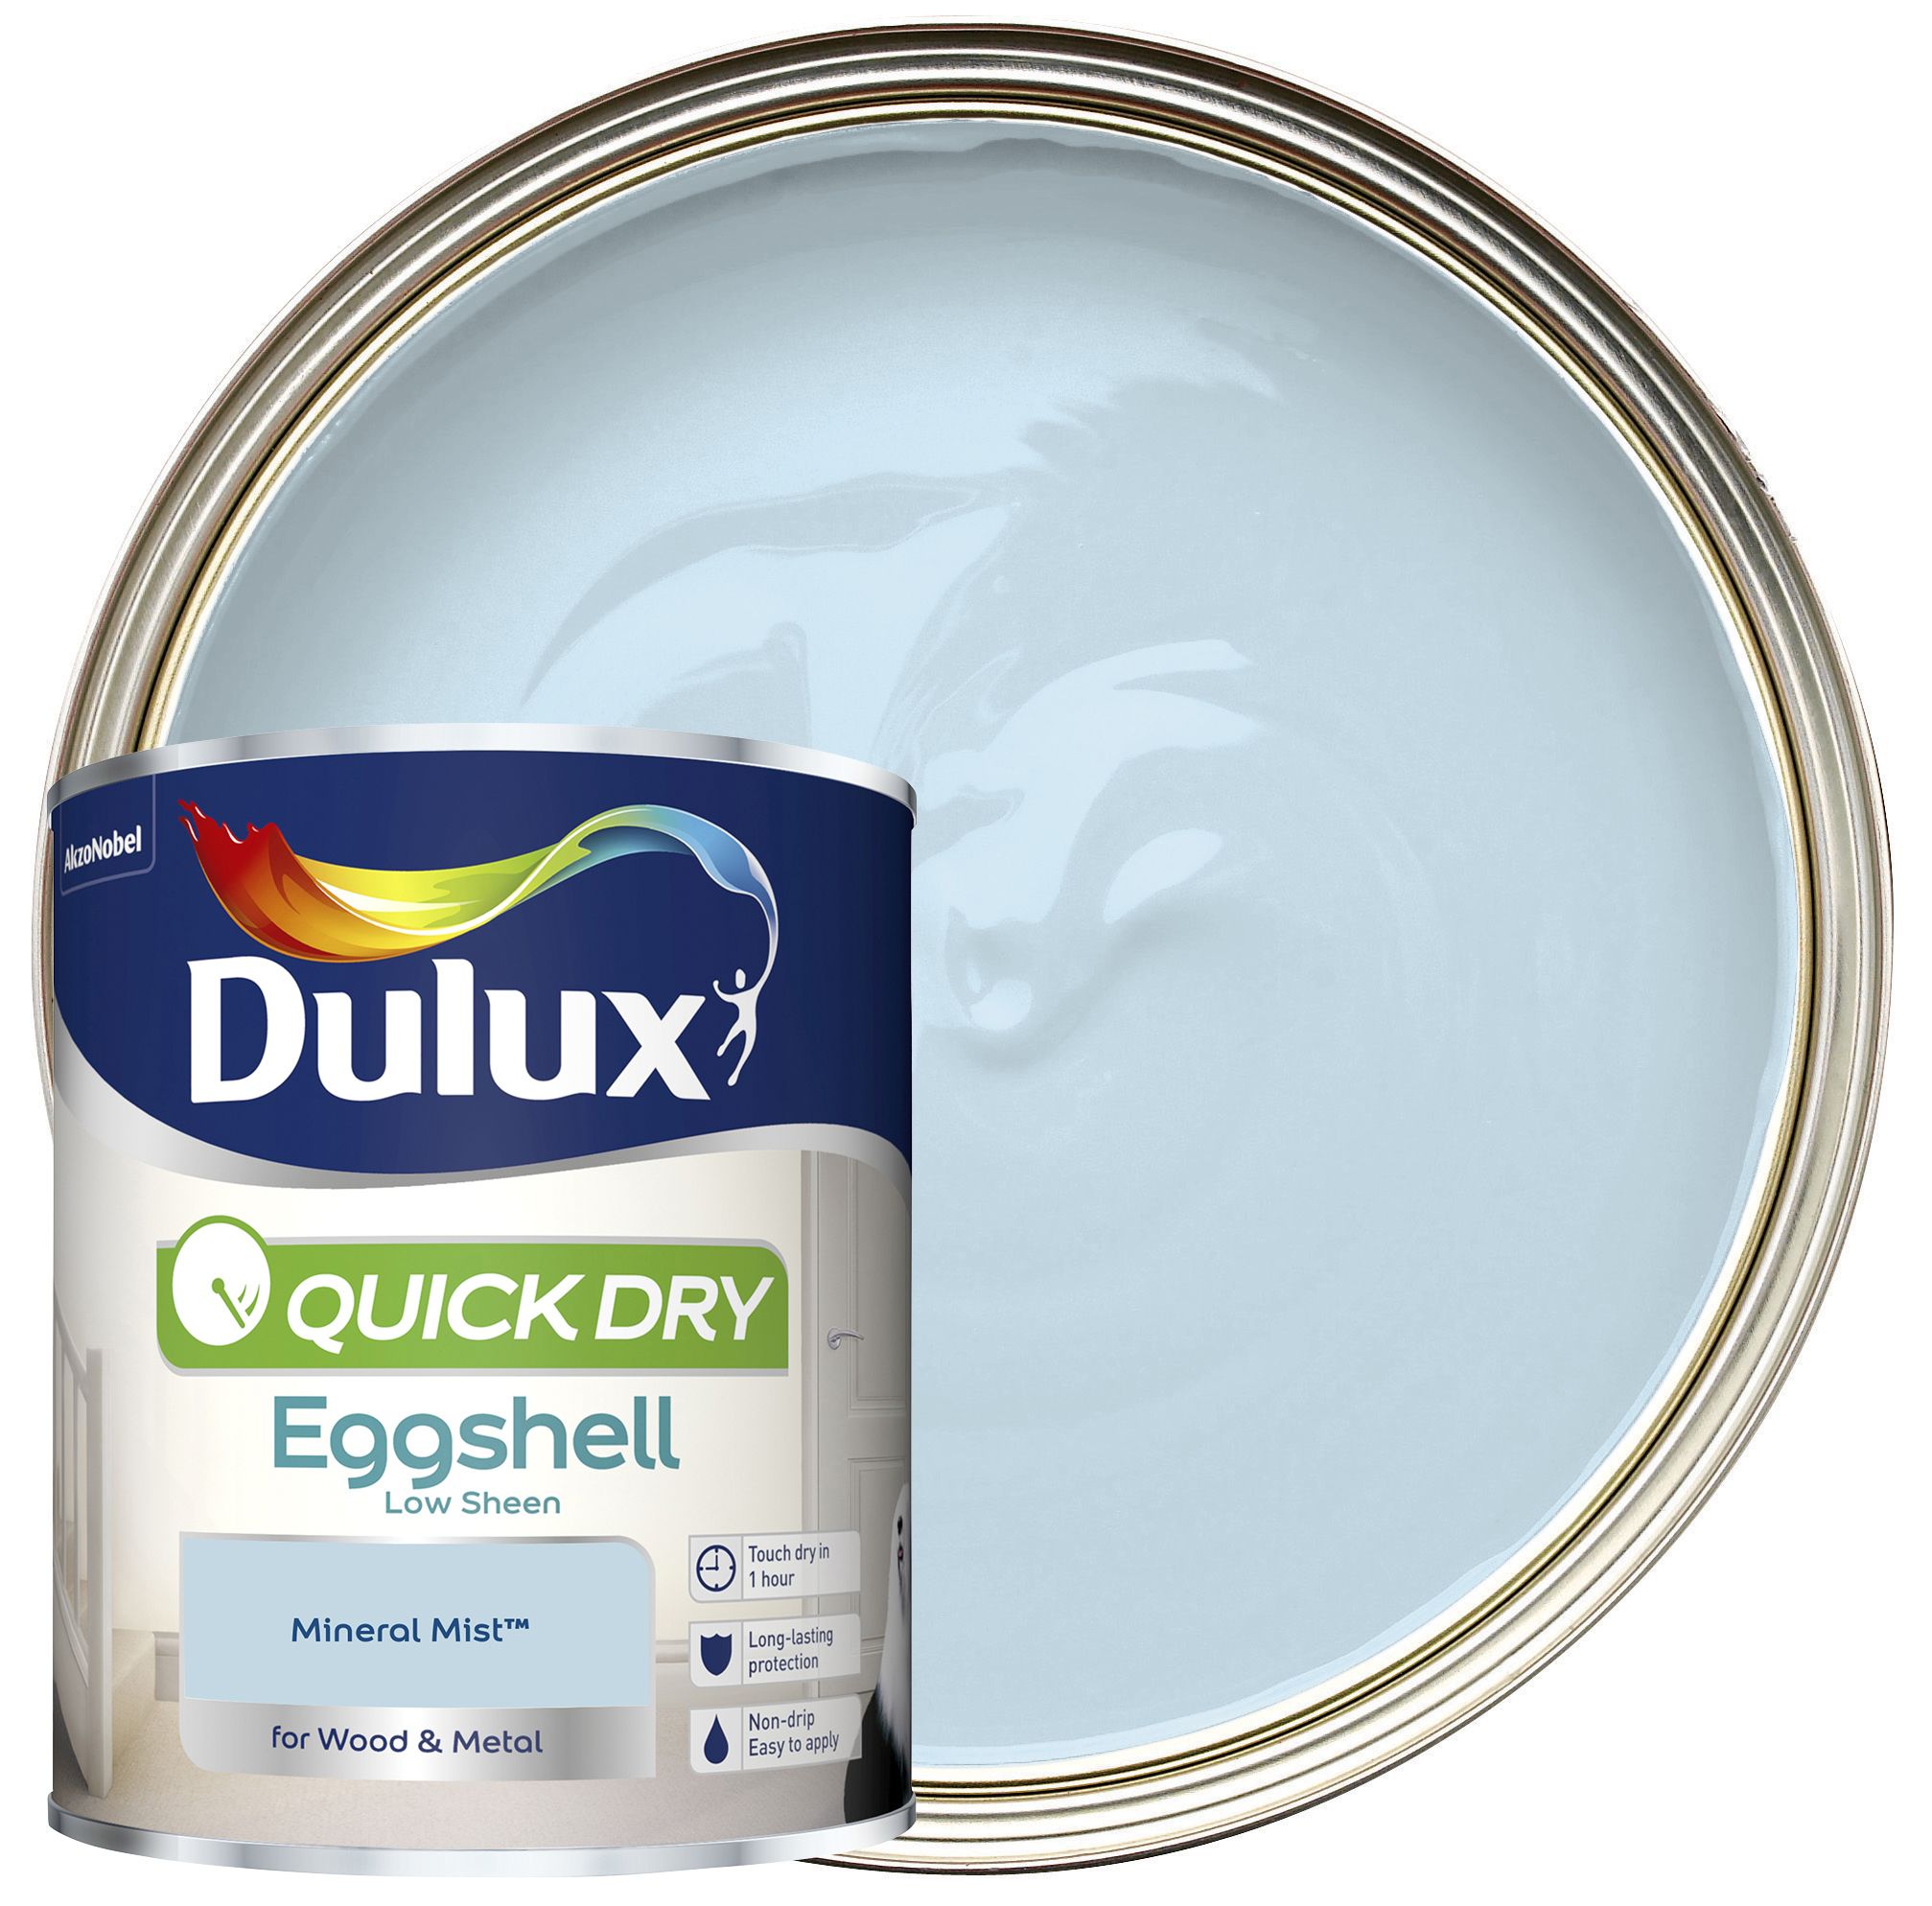 Image of Dulux Quick Drying Eggshell Paint - Mineral Mist - 750ml